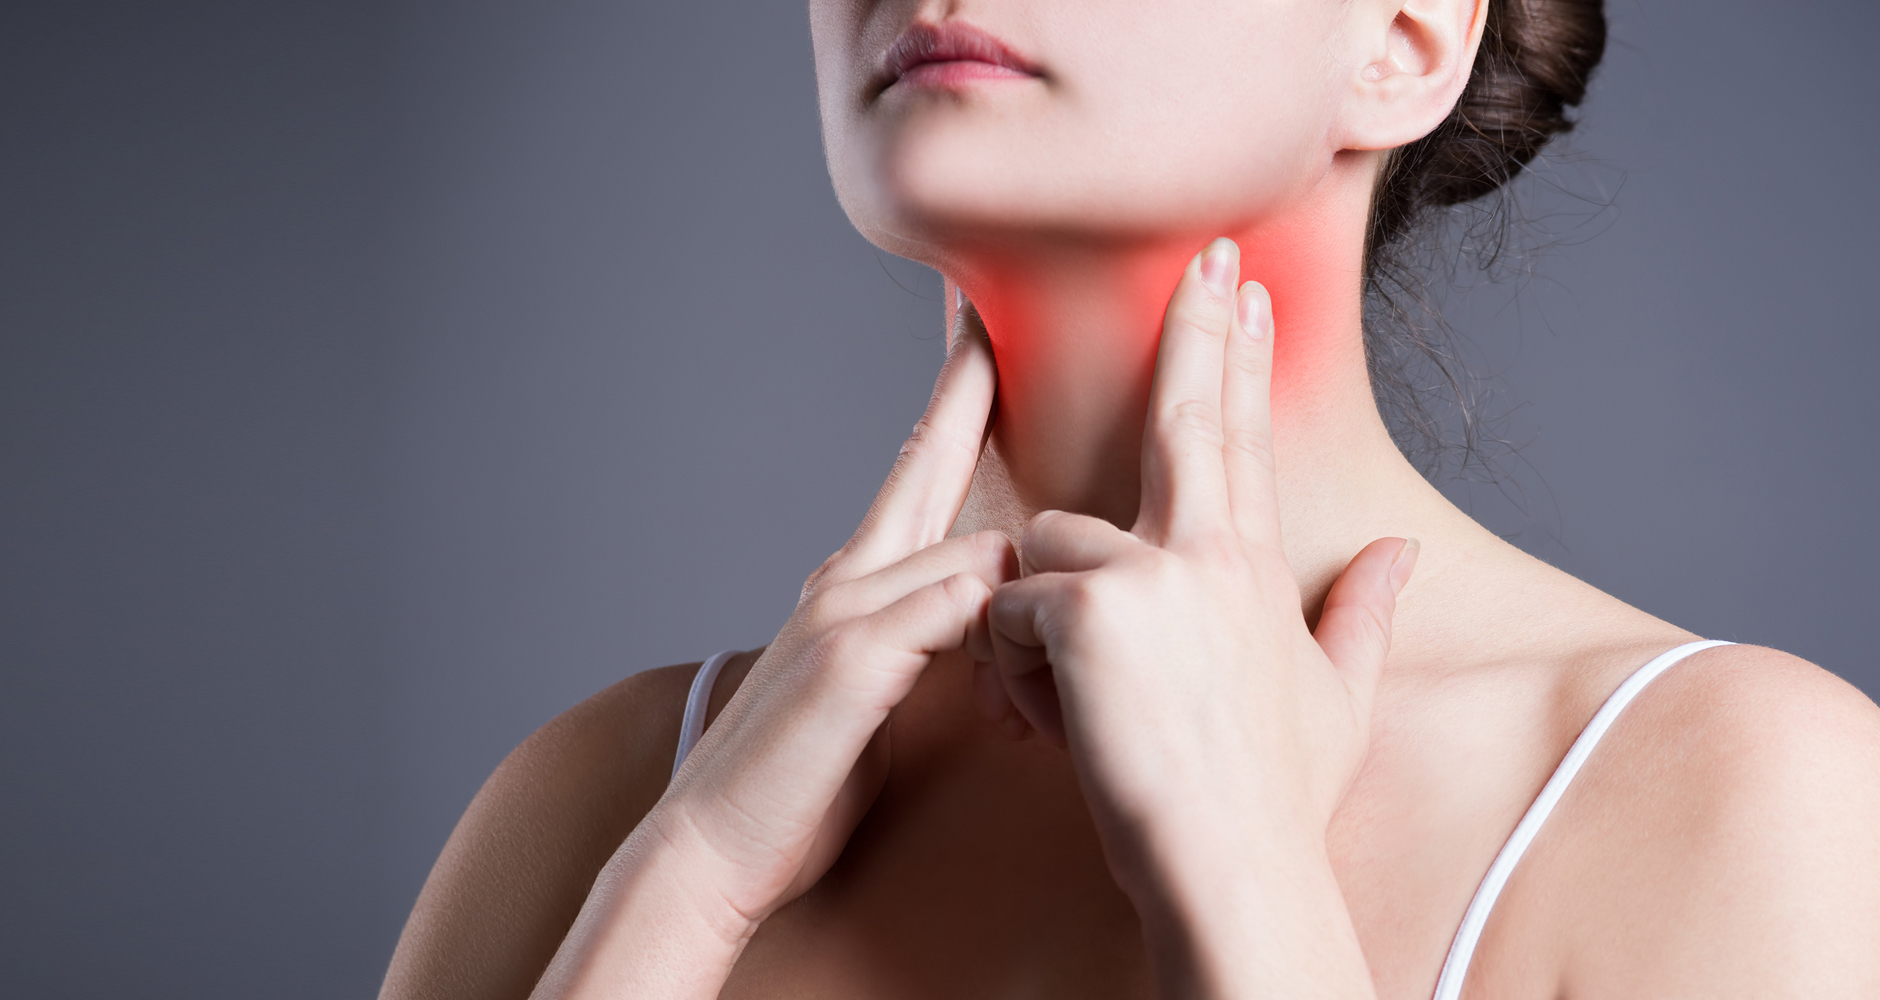 Sore Throat Remedies: 11 Natural Ways to Get Relief Fast